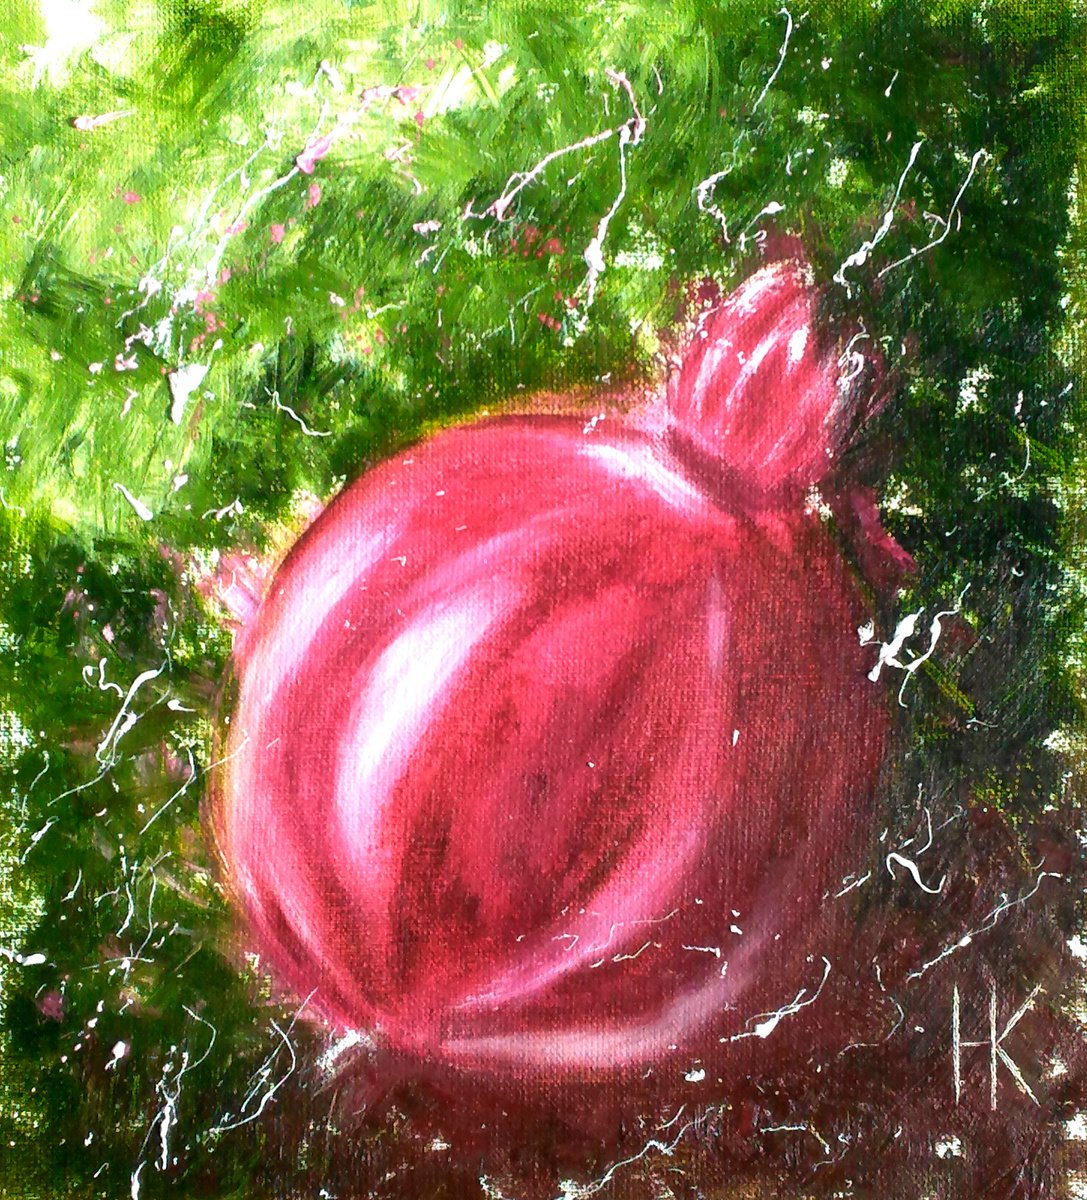 Pomegranate Painting Original Oil Artwork Fruit Still Life Impressionistic Small Home Wall... by Halyna Kirichenko